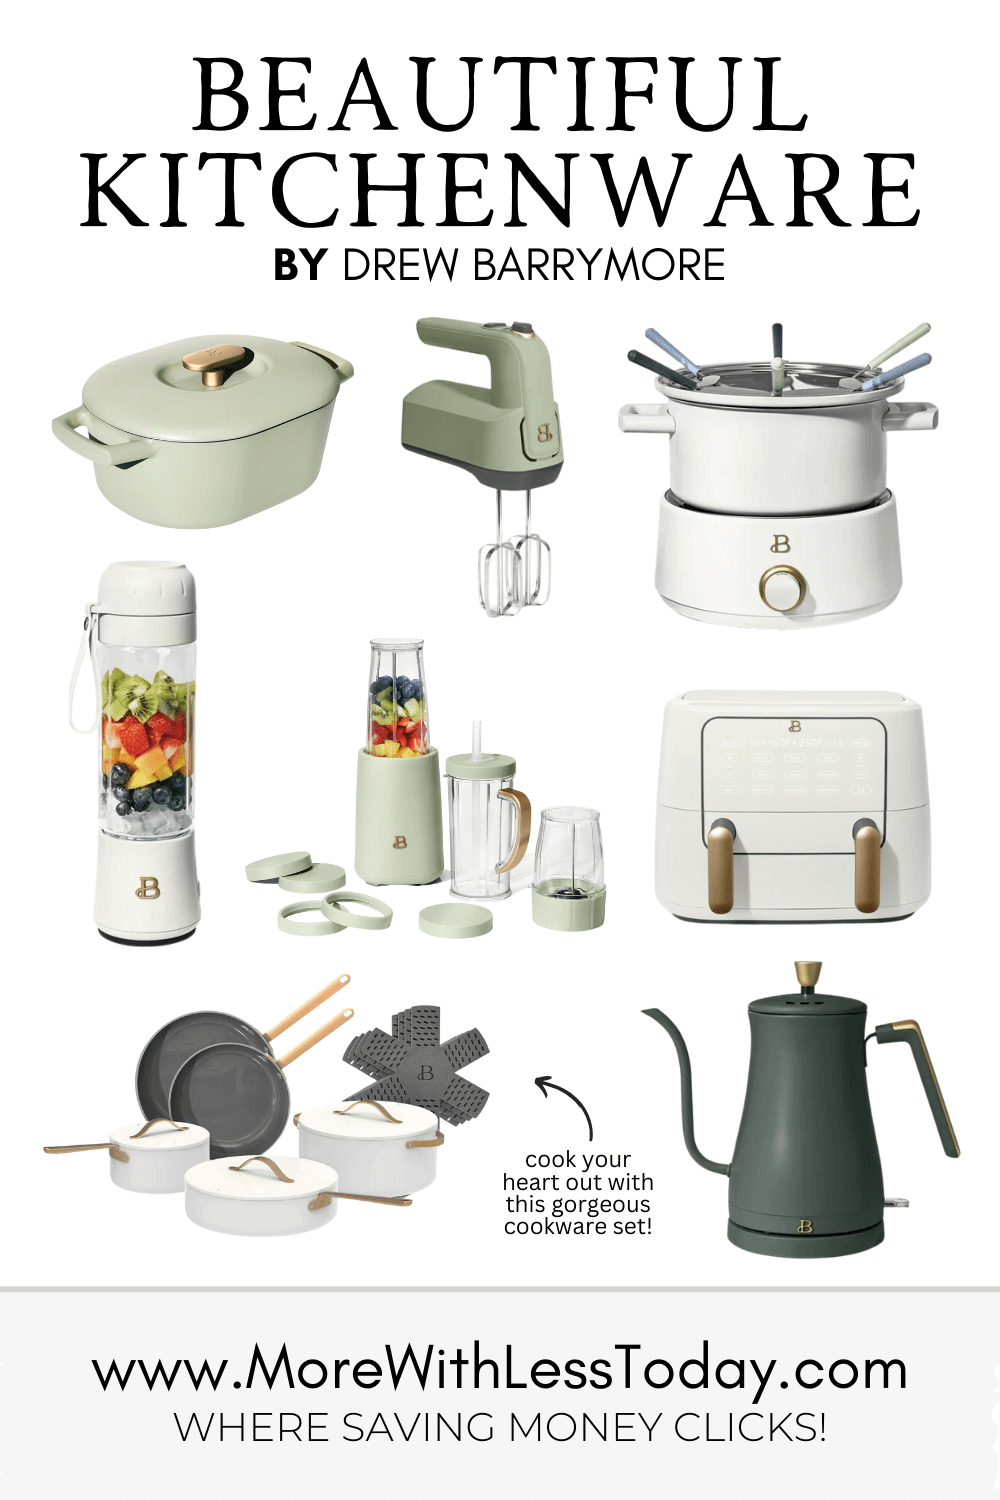 https://www.morewithlesstoday.com/wp-content/uploads/2023/10/New-items-from-Beautiful-Kitchenware-by-Drew-Barrymore-PIN.png